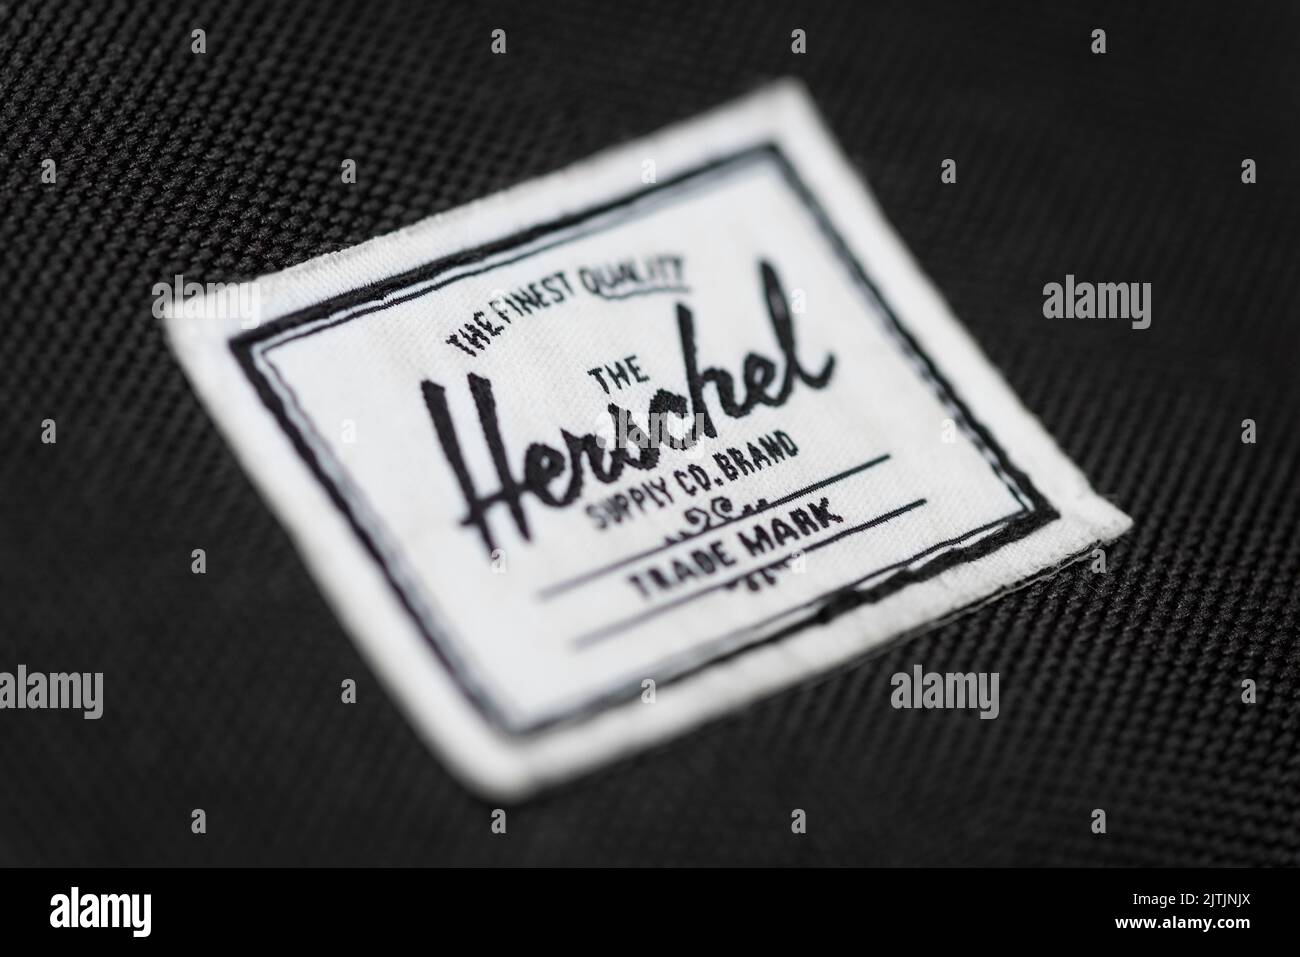 A close-up shot of the Herschel label as seen on a product. Stock Photo